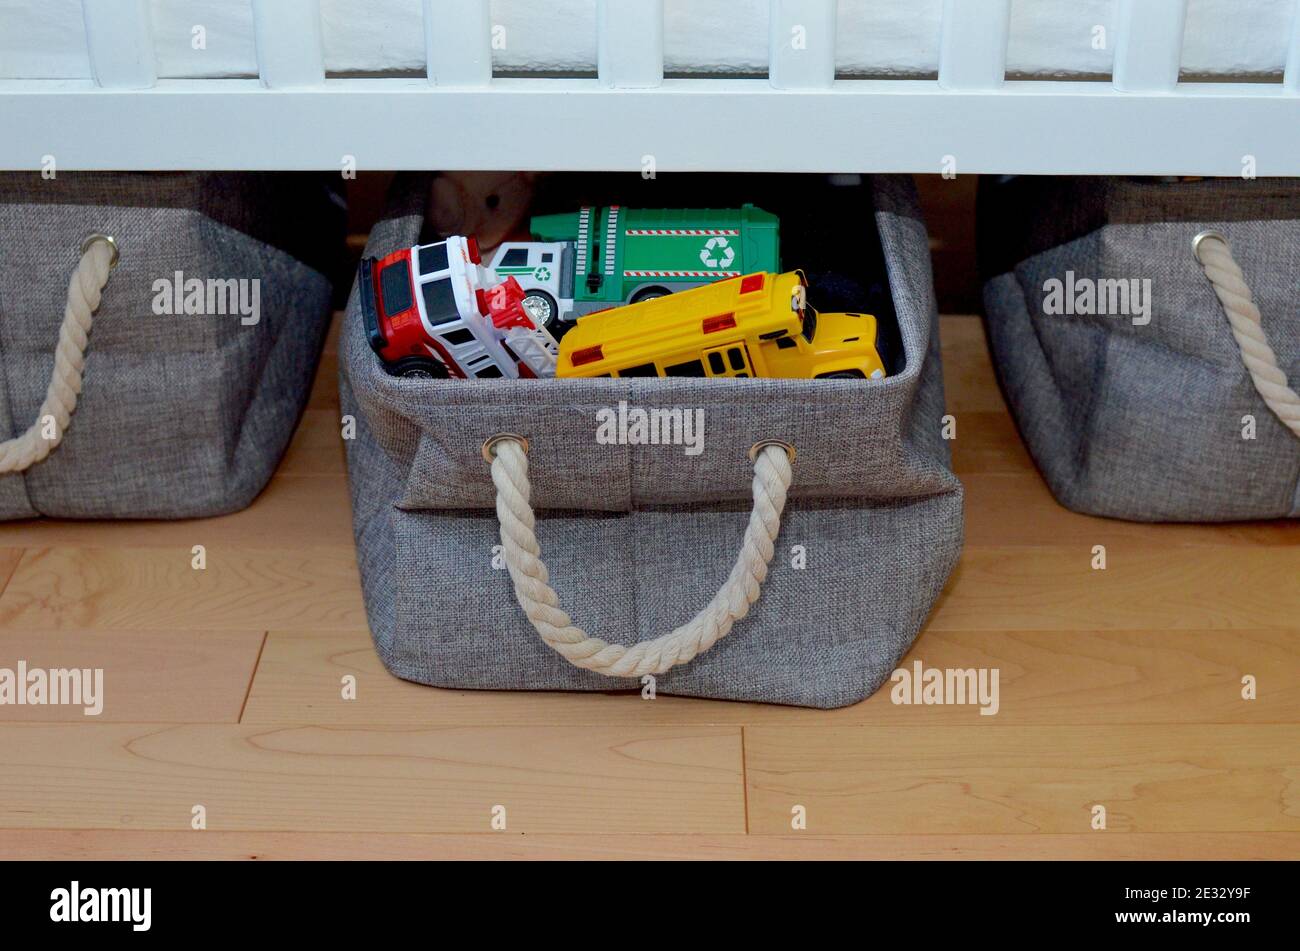 Easy simple home storage solutions for children's play area to clean up toys, games, books, stuffed toys Stock Photo